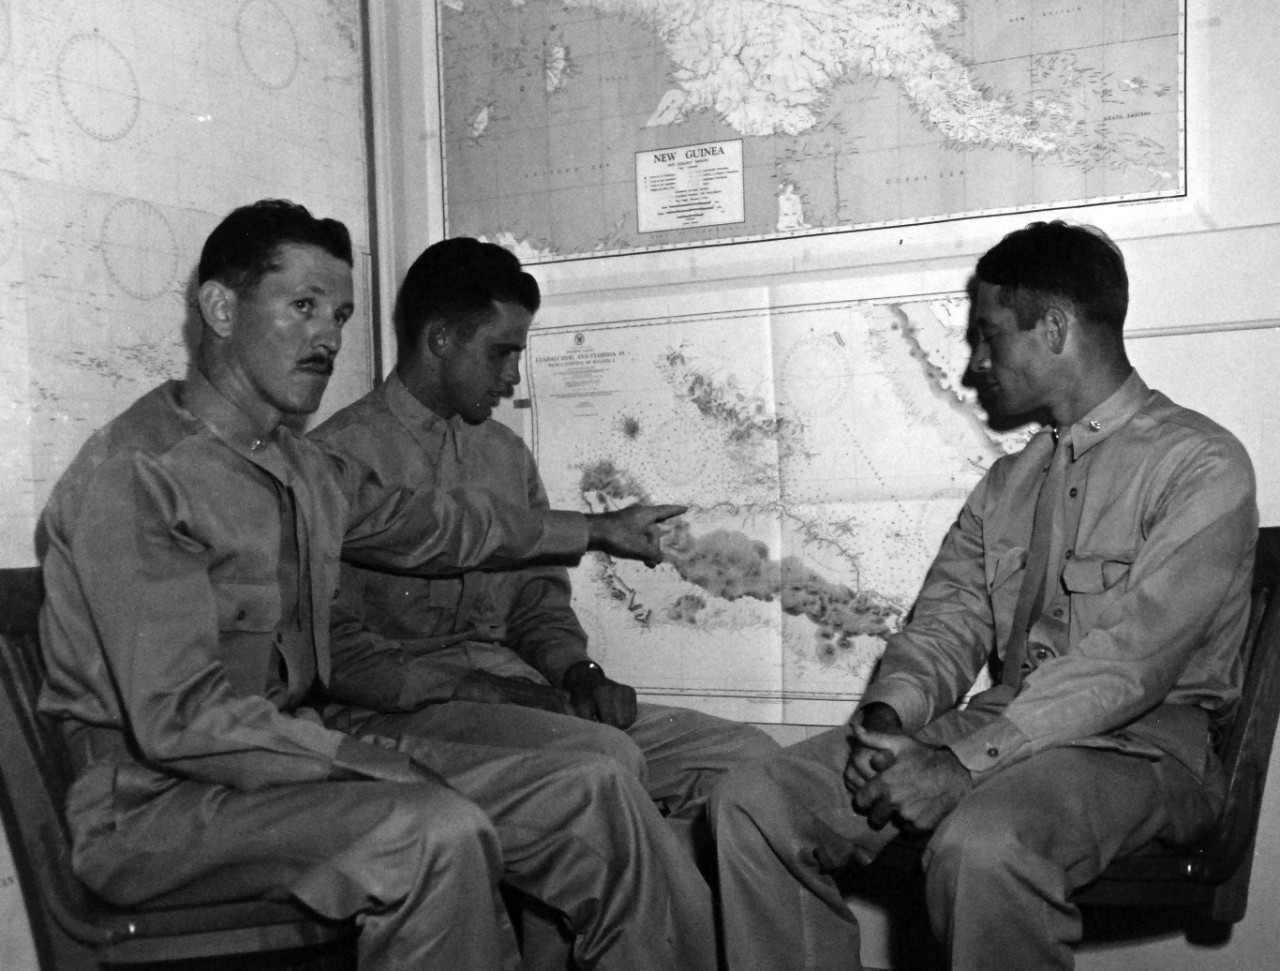 80-G-27199: Guadalcanal Campaign, August 1942 to February 1943.  A A Left to right: Lieutenant Colonel Richard C. Mangrum; Captain Marion E. Carl, and Major John L. Smith, USMC Aviators, who were interviewed concerning their action in the Guadalcanal area.  Lieutenant Colonel Mangrum was in command of a dive-bomber squadron.   Official U.S. Navy photograph, now in the collections of the National Archives.  (2016/12/06).